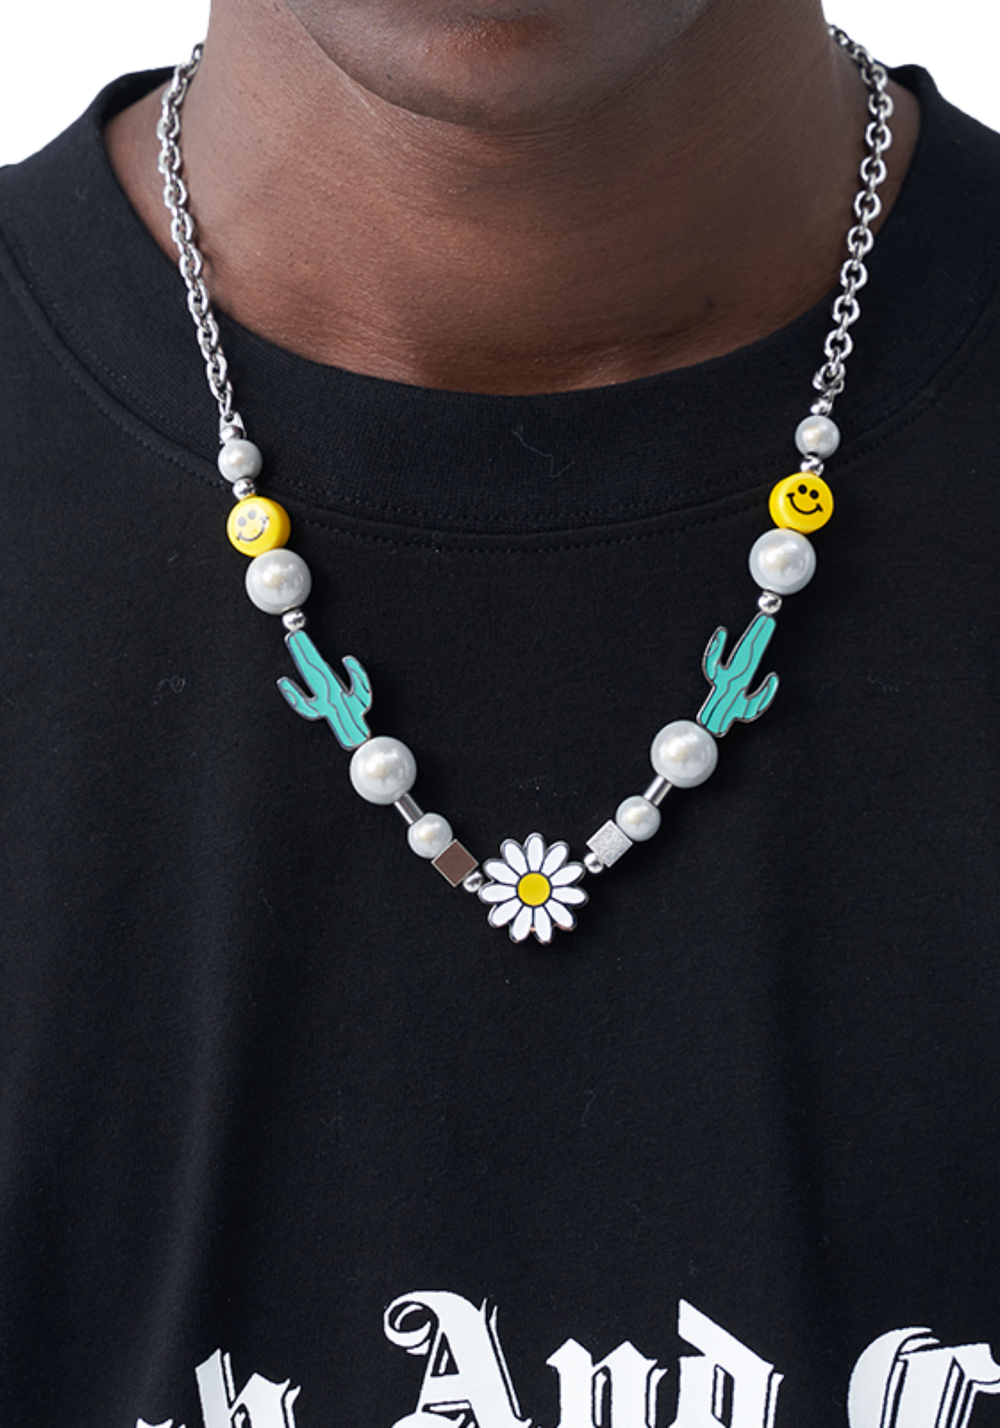 Harsh and Cruel - Daisy Pearl Cactus Smiley Face Necklace - PSYLOS1